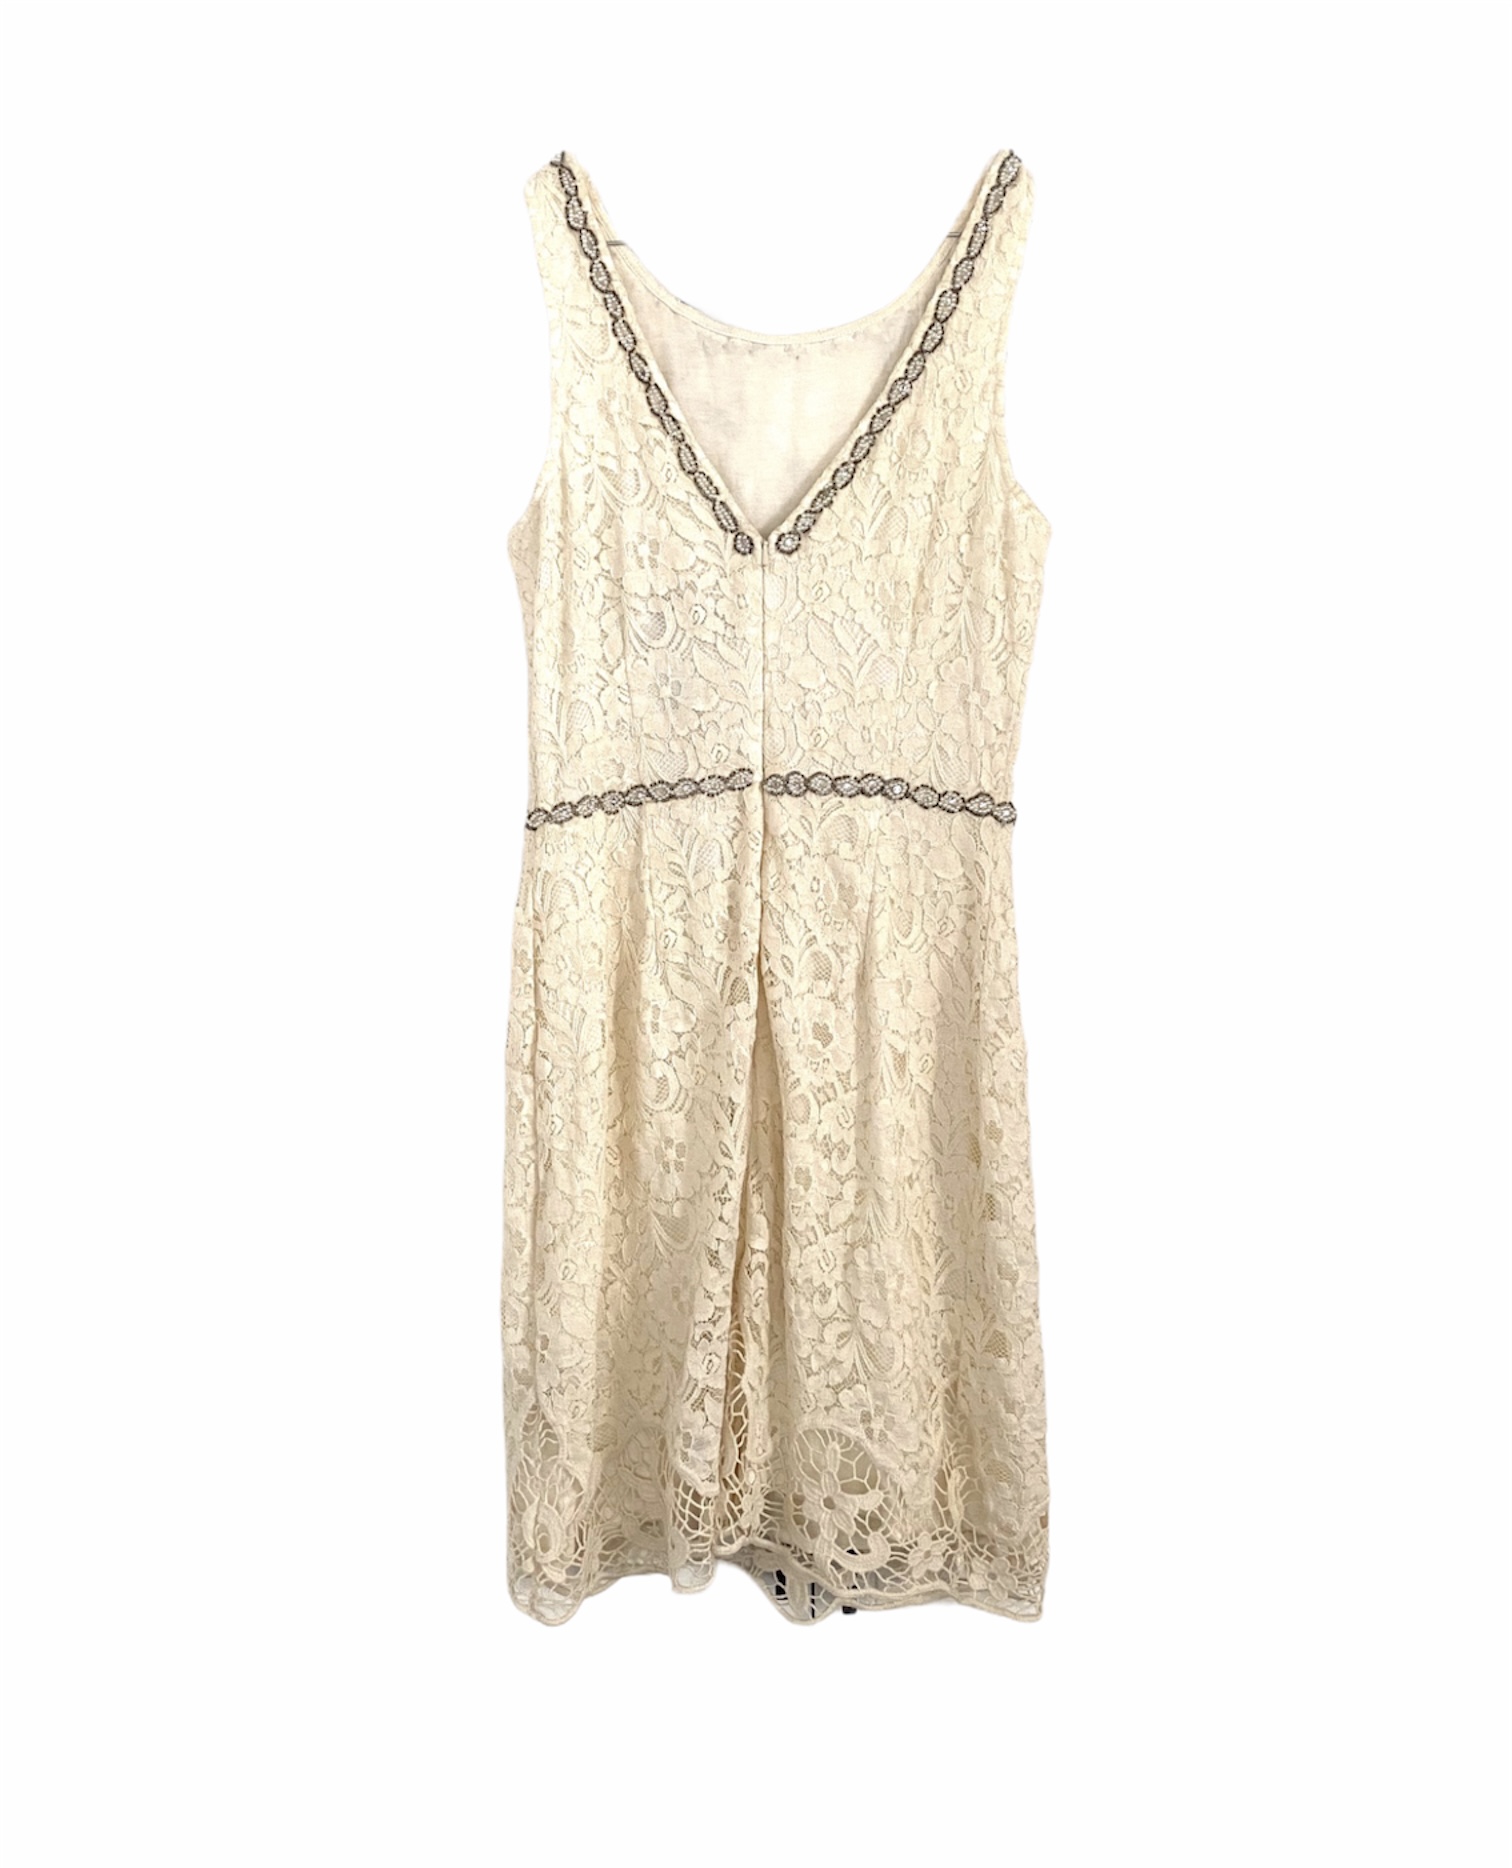 Forever New Lace Jewelled Dress - Size 8 - The Re: Club